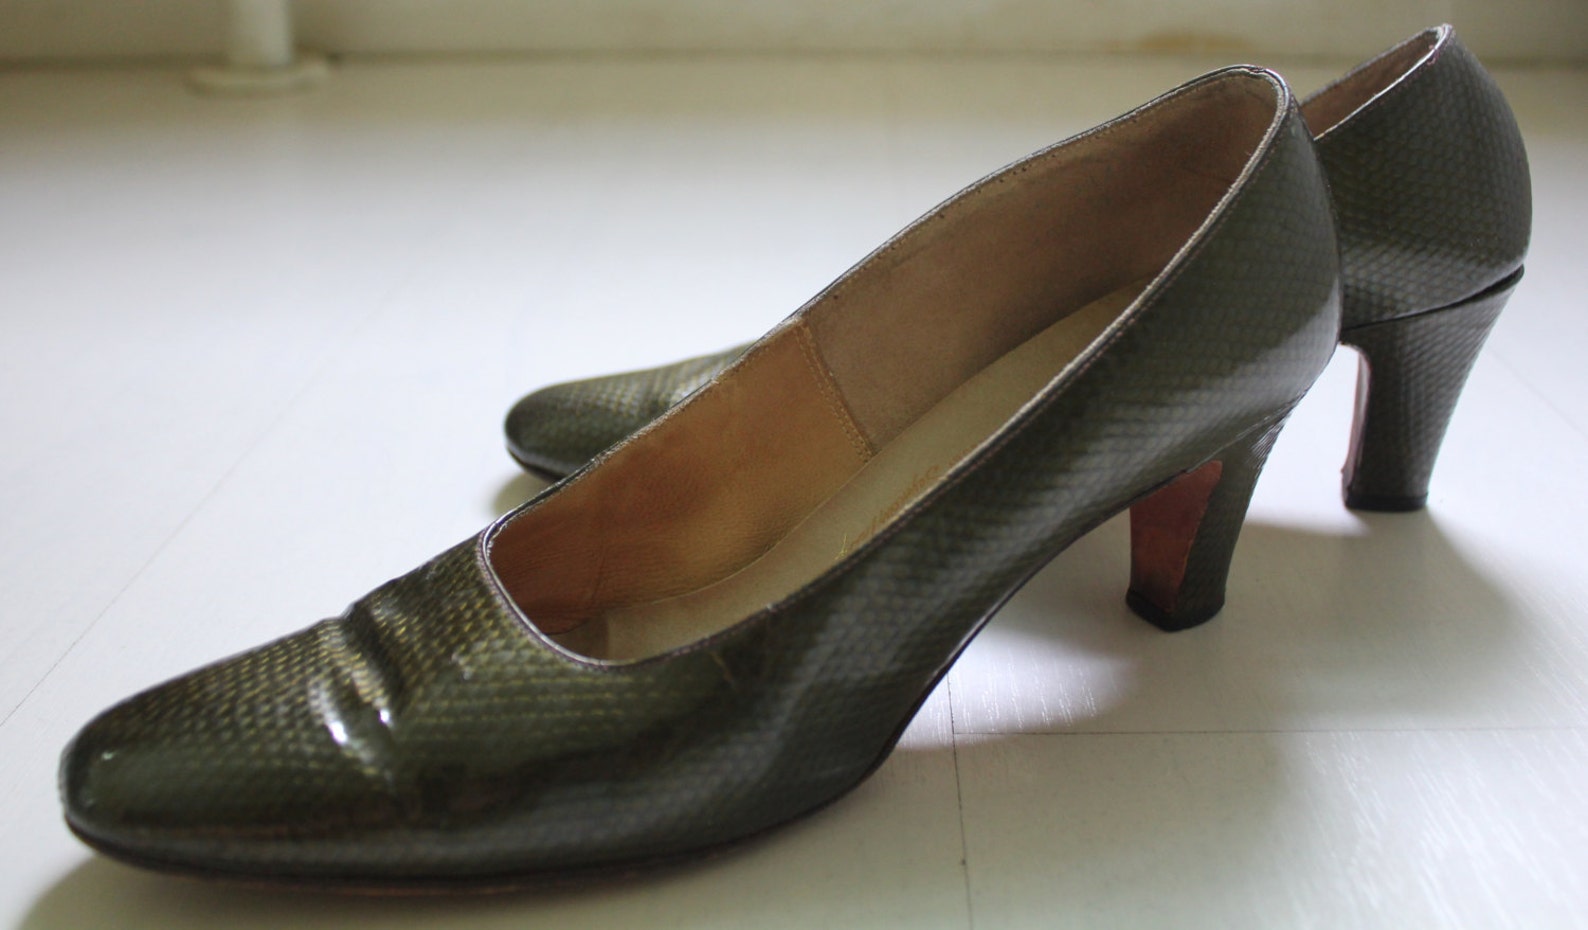 1960s Patent Leather Faux Snake Skin Pumps Vintage Shoes Troylings - Etsy